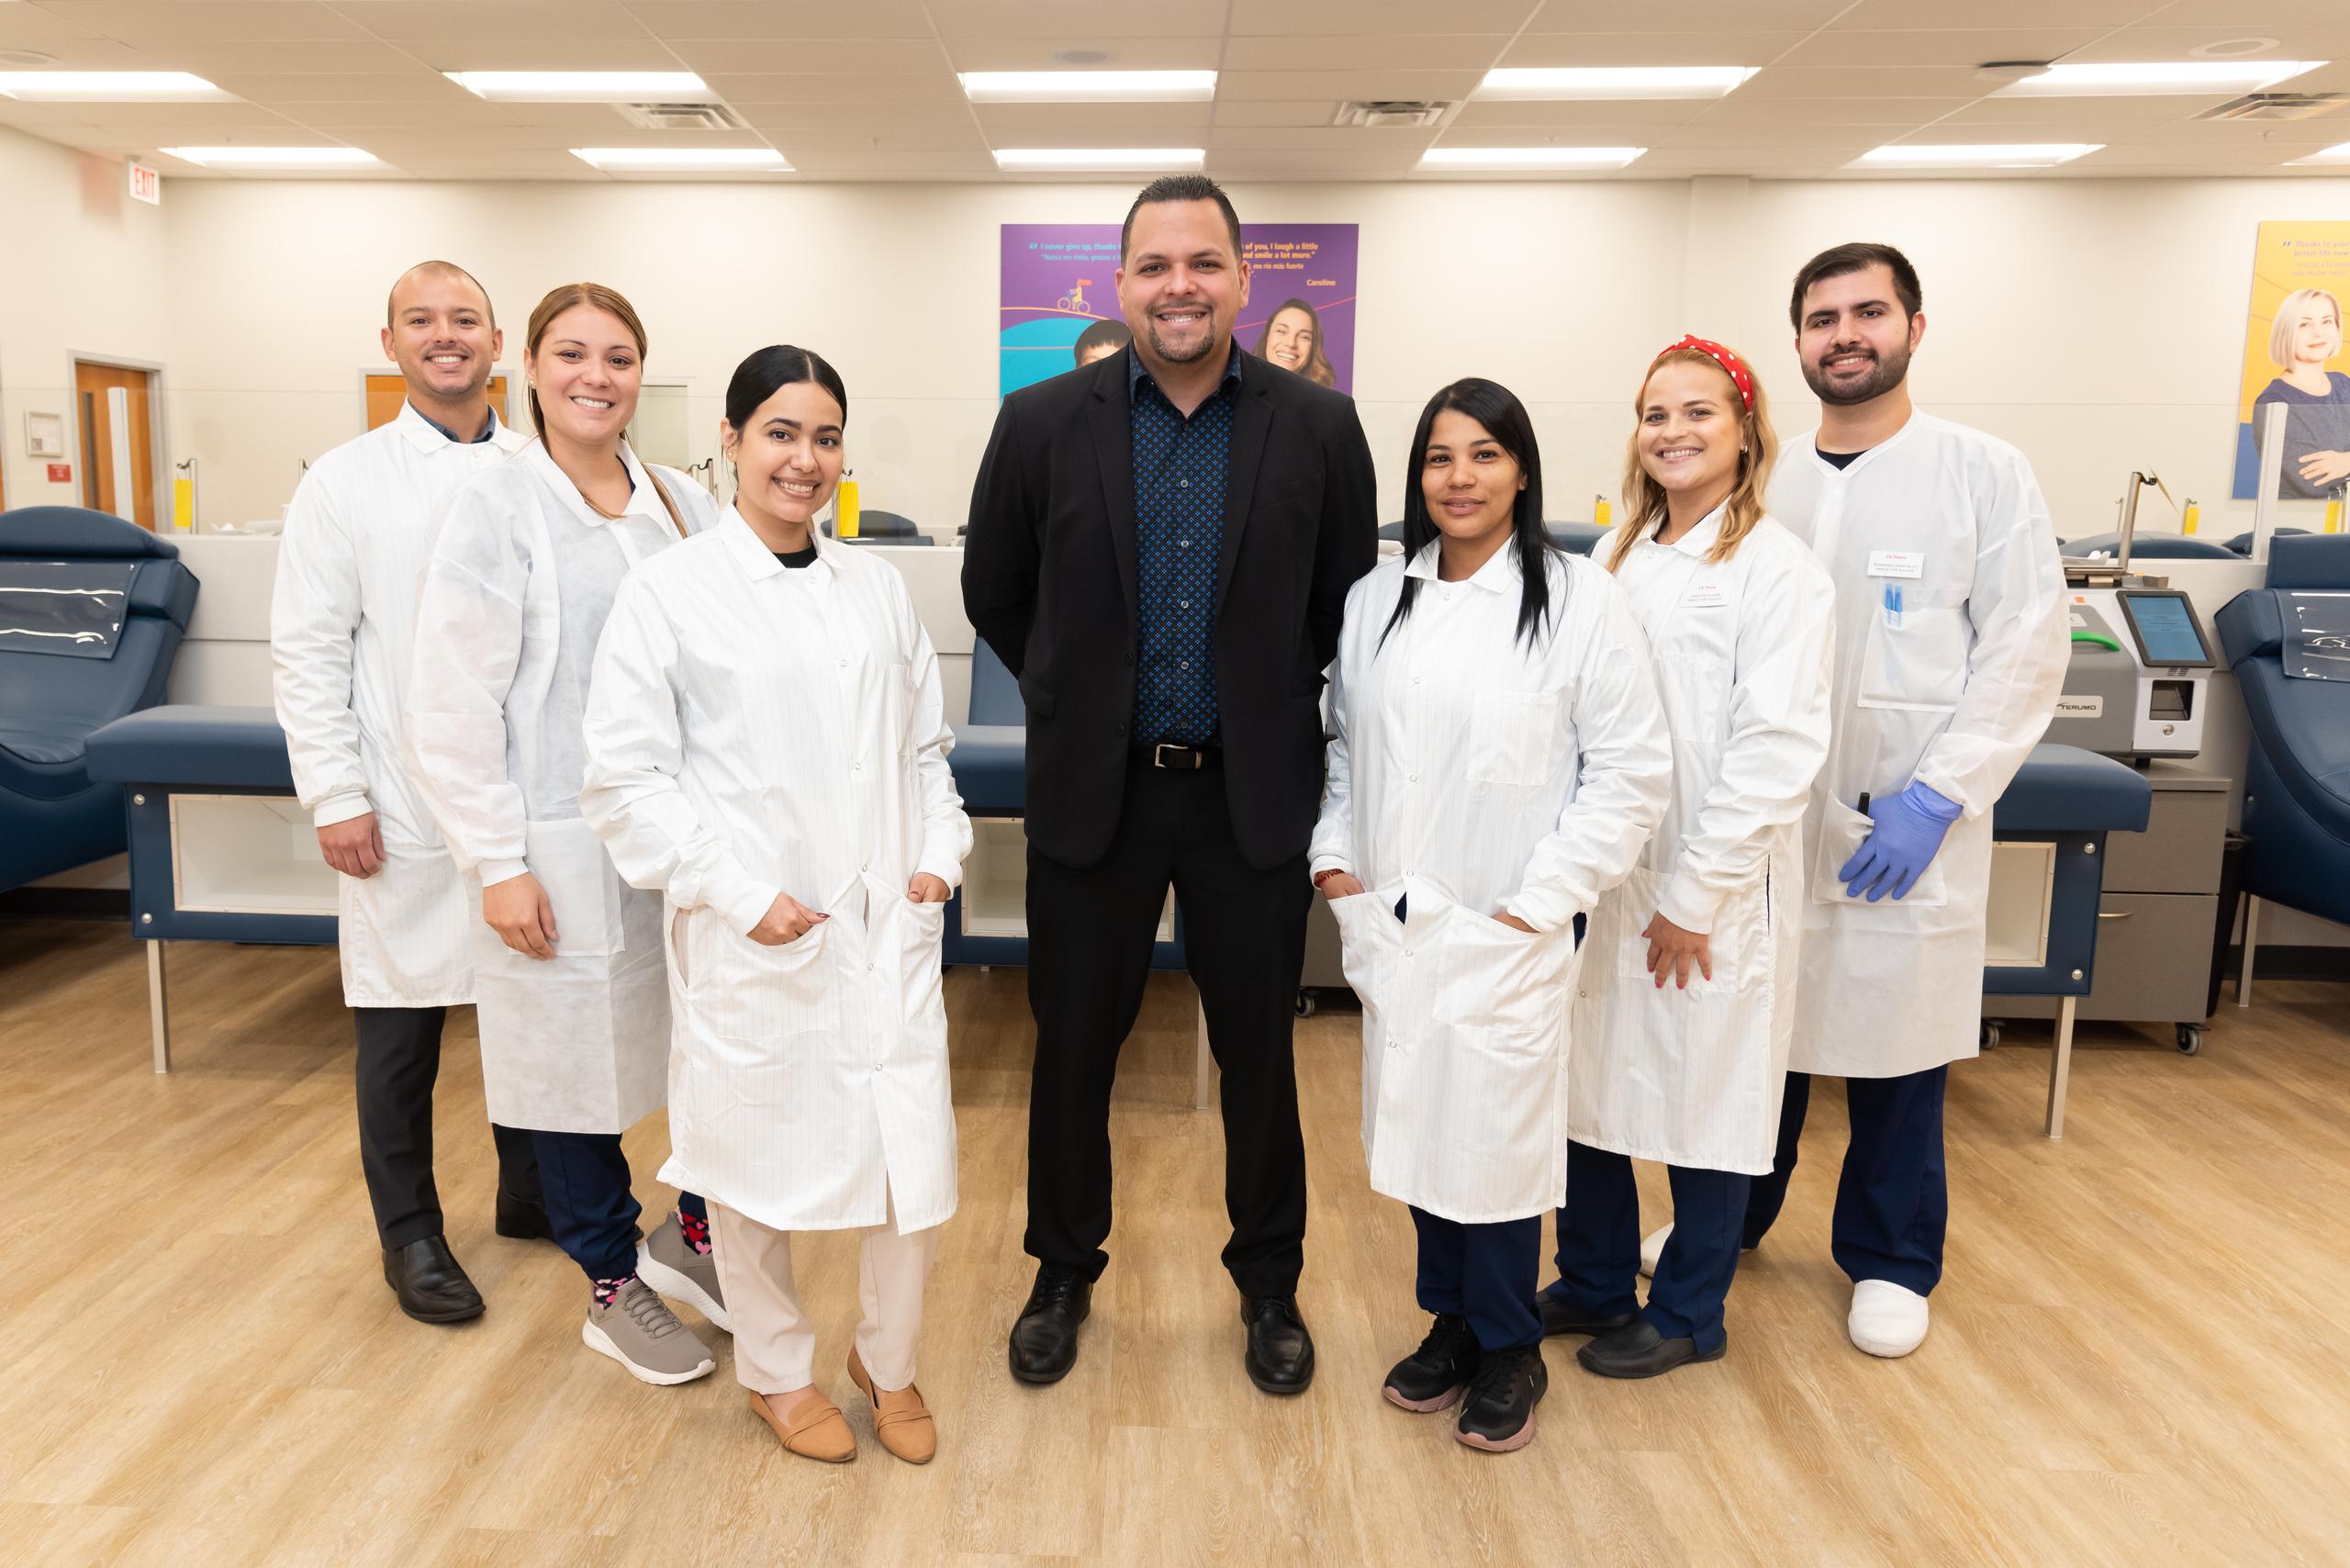 CSL Plasma, a leading and leading multinational company in Puerto Rico, is tasked with serving as a plasma collection center for millions of patients not only in Puerto Rico.